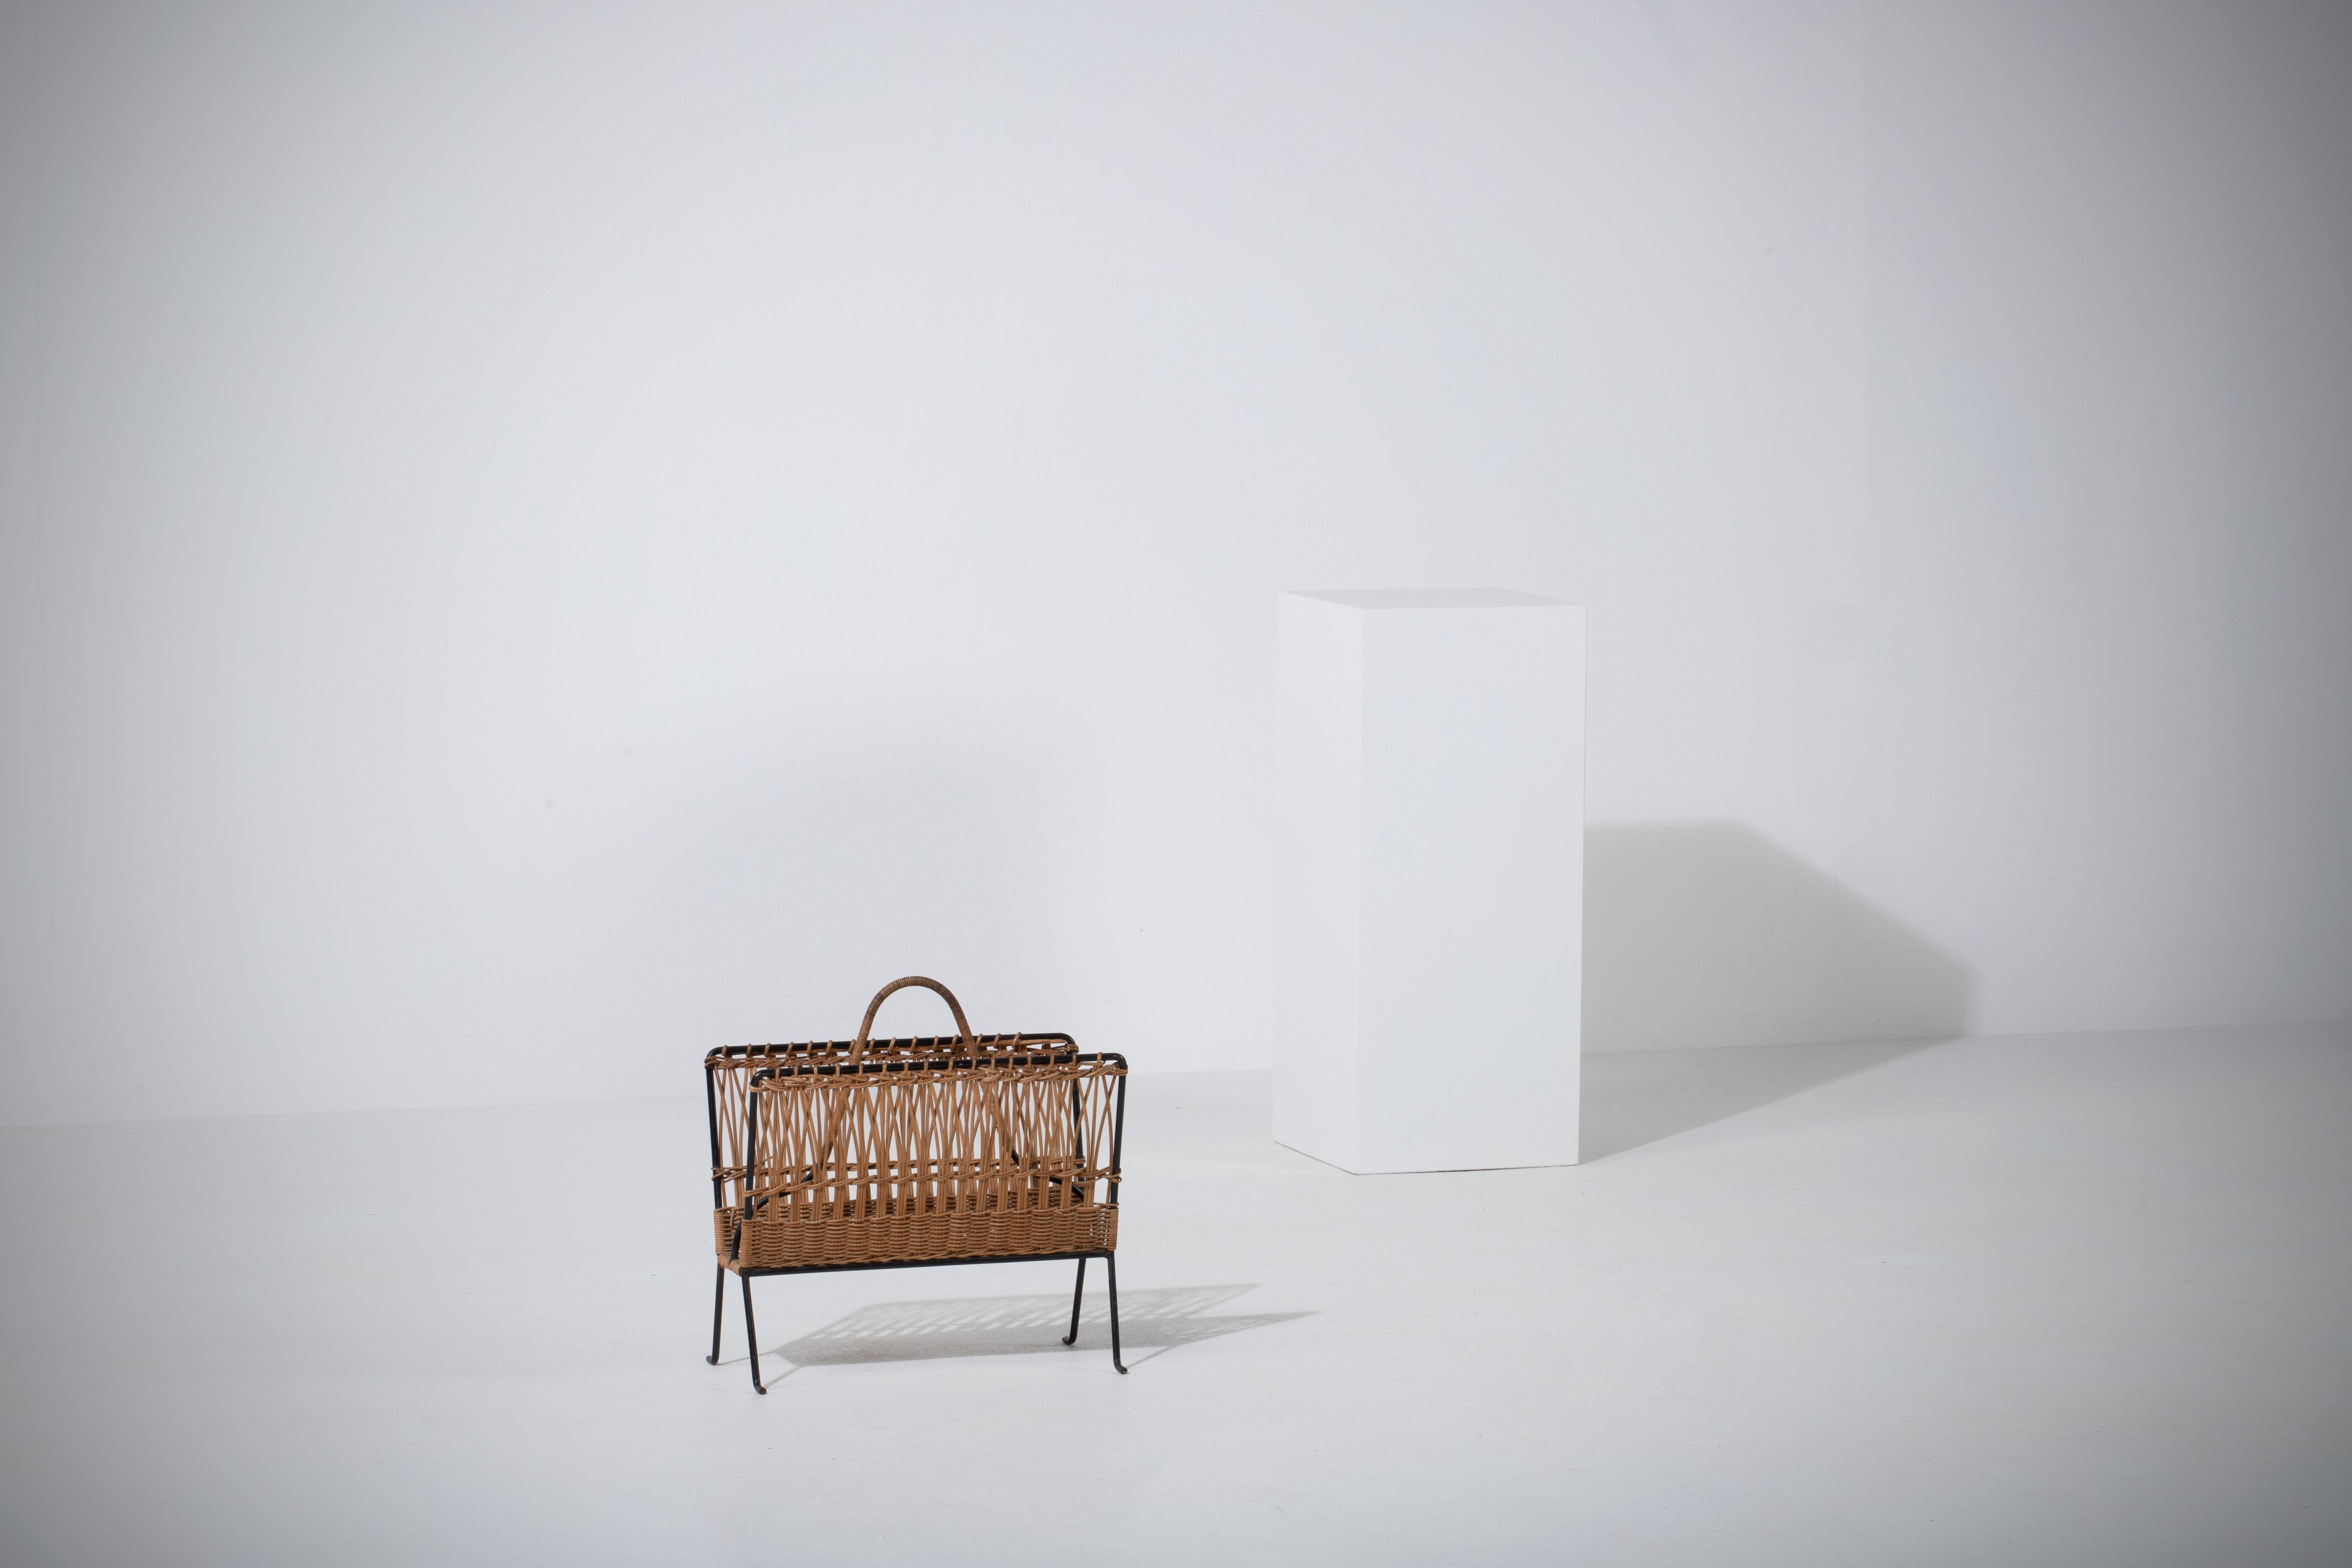 Introducing a truly unique Jacques Adnet wicker magazine rack, a perfect blend of style and functionality. This rare piece features a sturdy black iron frame, elegantly woven wicker sides, and a practical handle for easy mobility. 

This